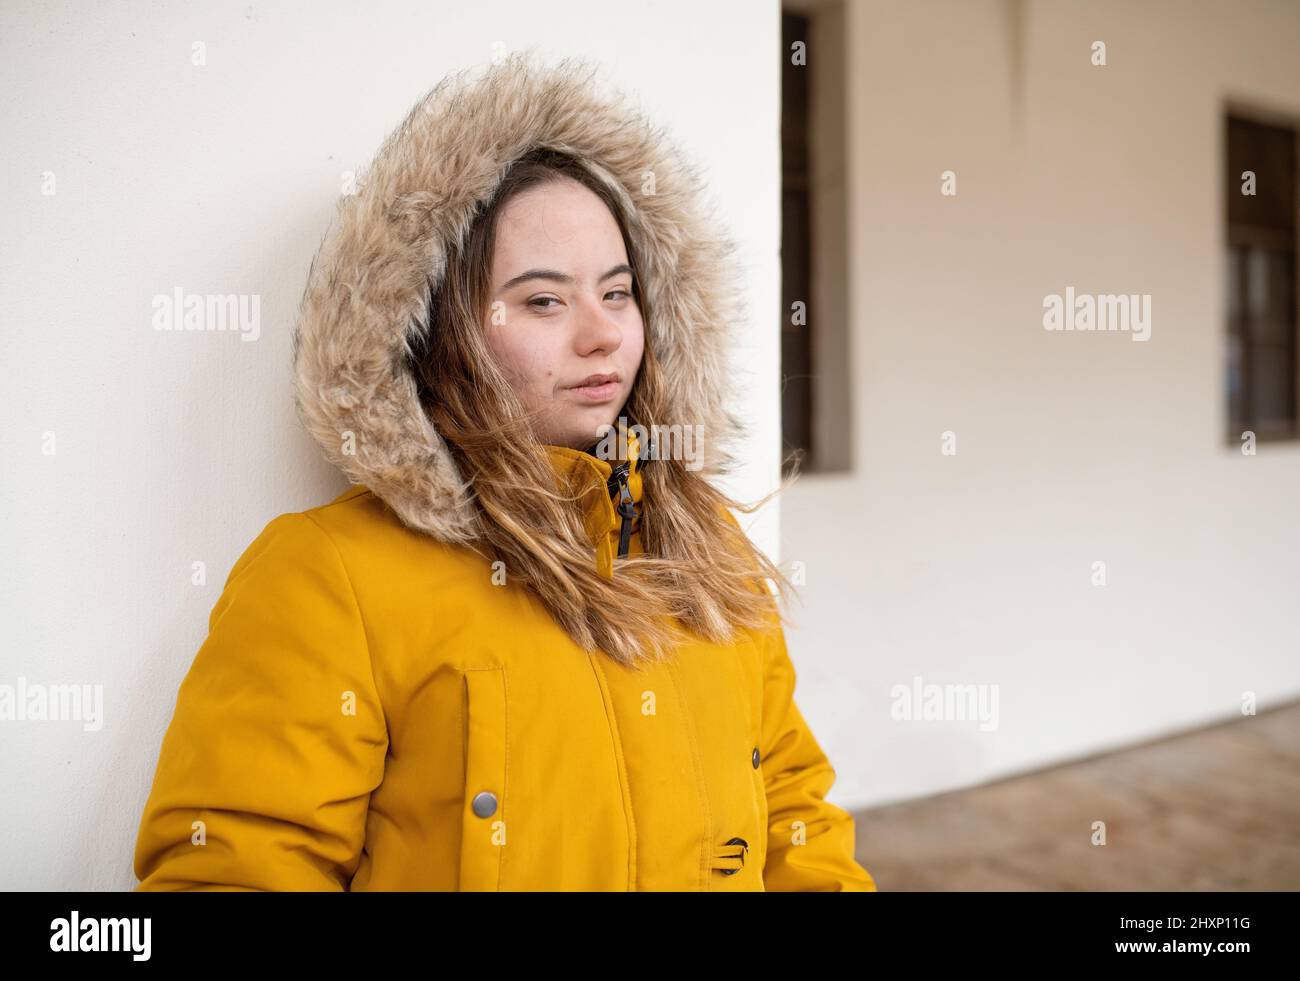 Thoughtful young woman with Down syndrome weraing parka, leaning the wall and looking at camera. Stock Photo